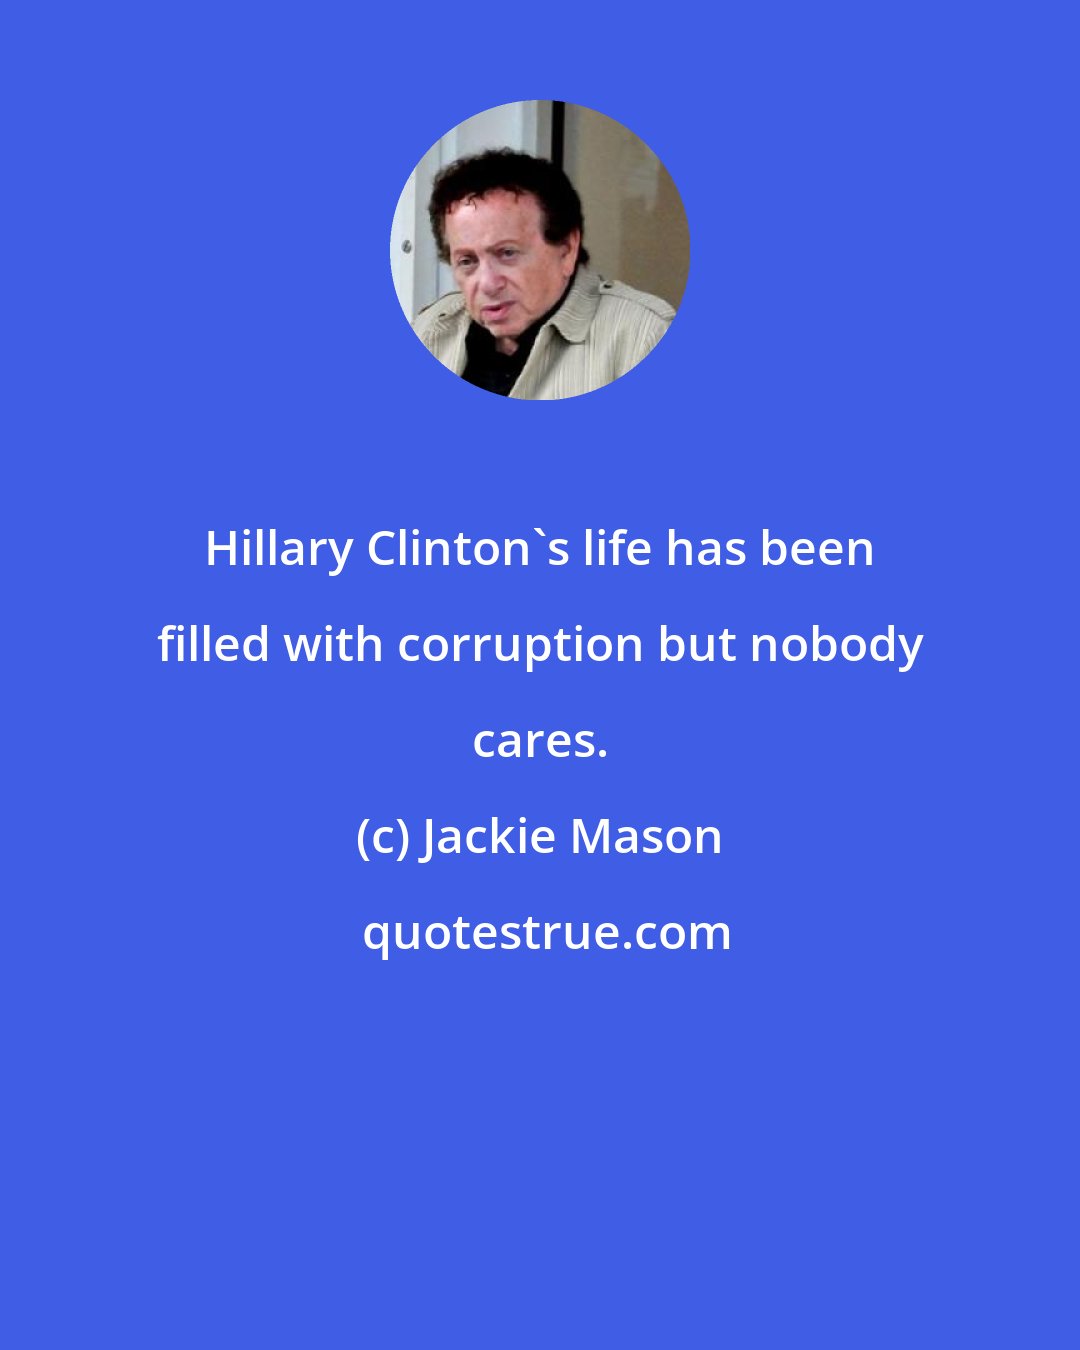 Jackie Mason: Hillary Clinton's life has been filled with corruption but nobody cares.